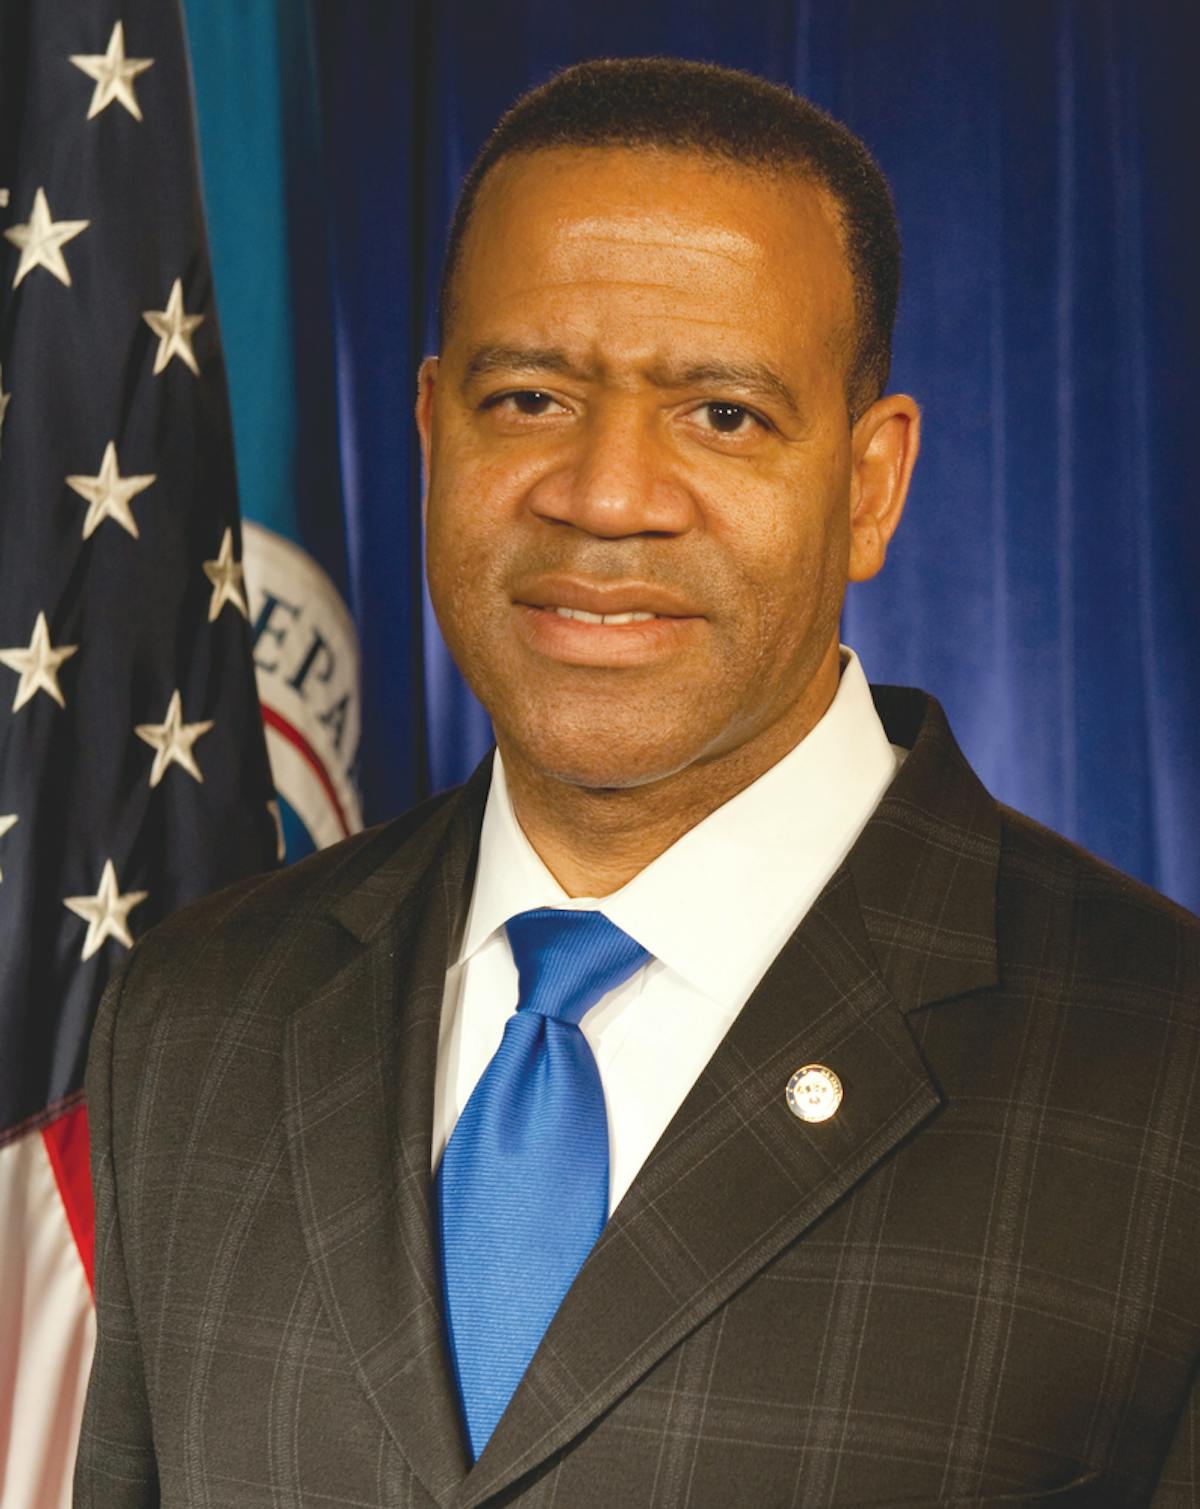 &ldquo;Had I not had my bachelor&rsquo;s degree, I would not have been appointed fire chief&hellip;because of the competition for the job.&rdquo; Chief Kelvin Cochran Atlanta, GA, Fire Rescue Department